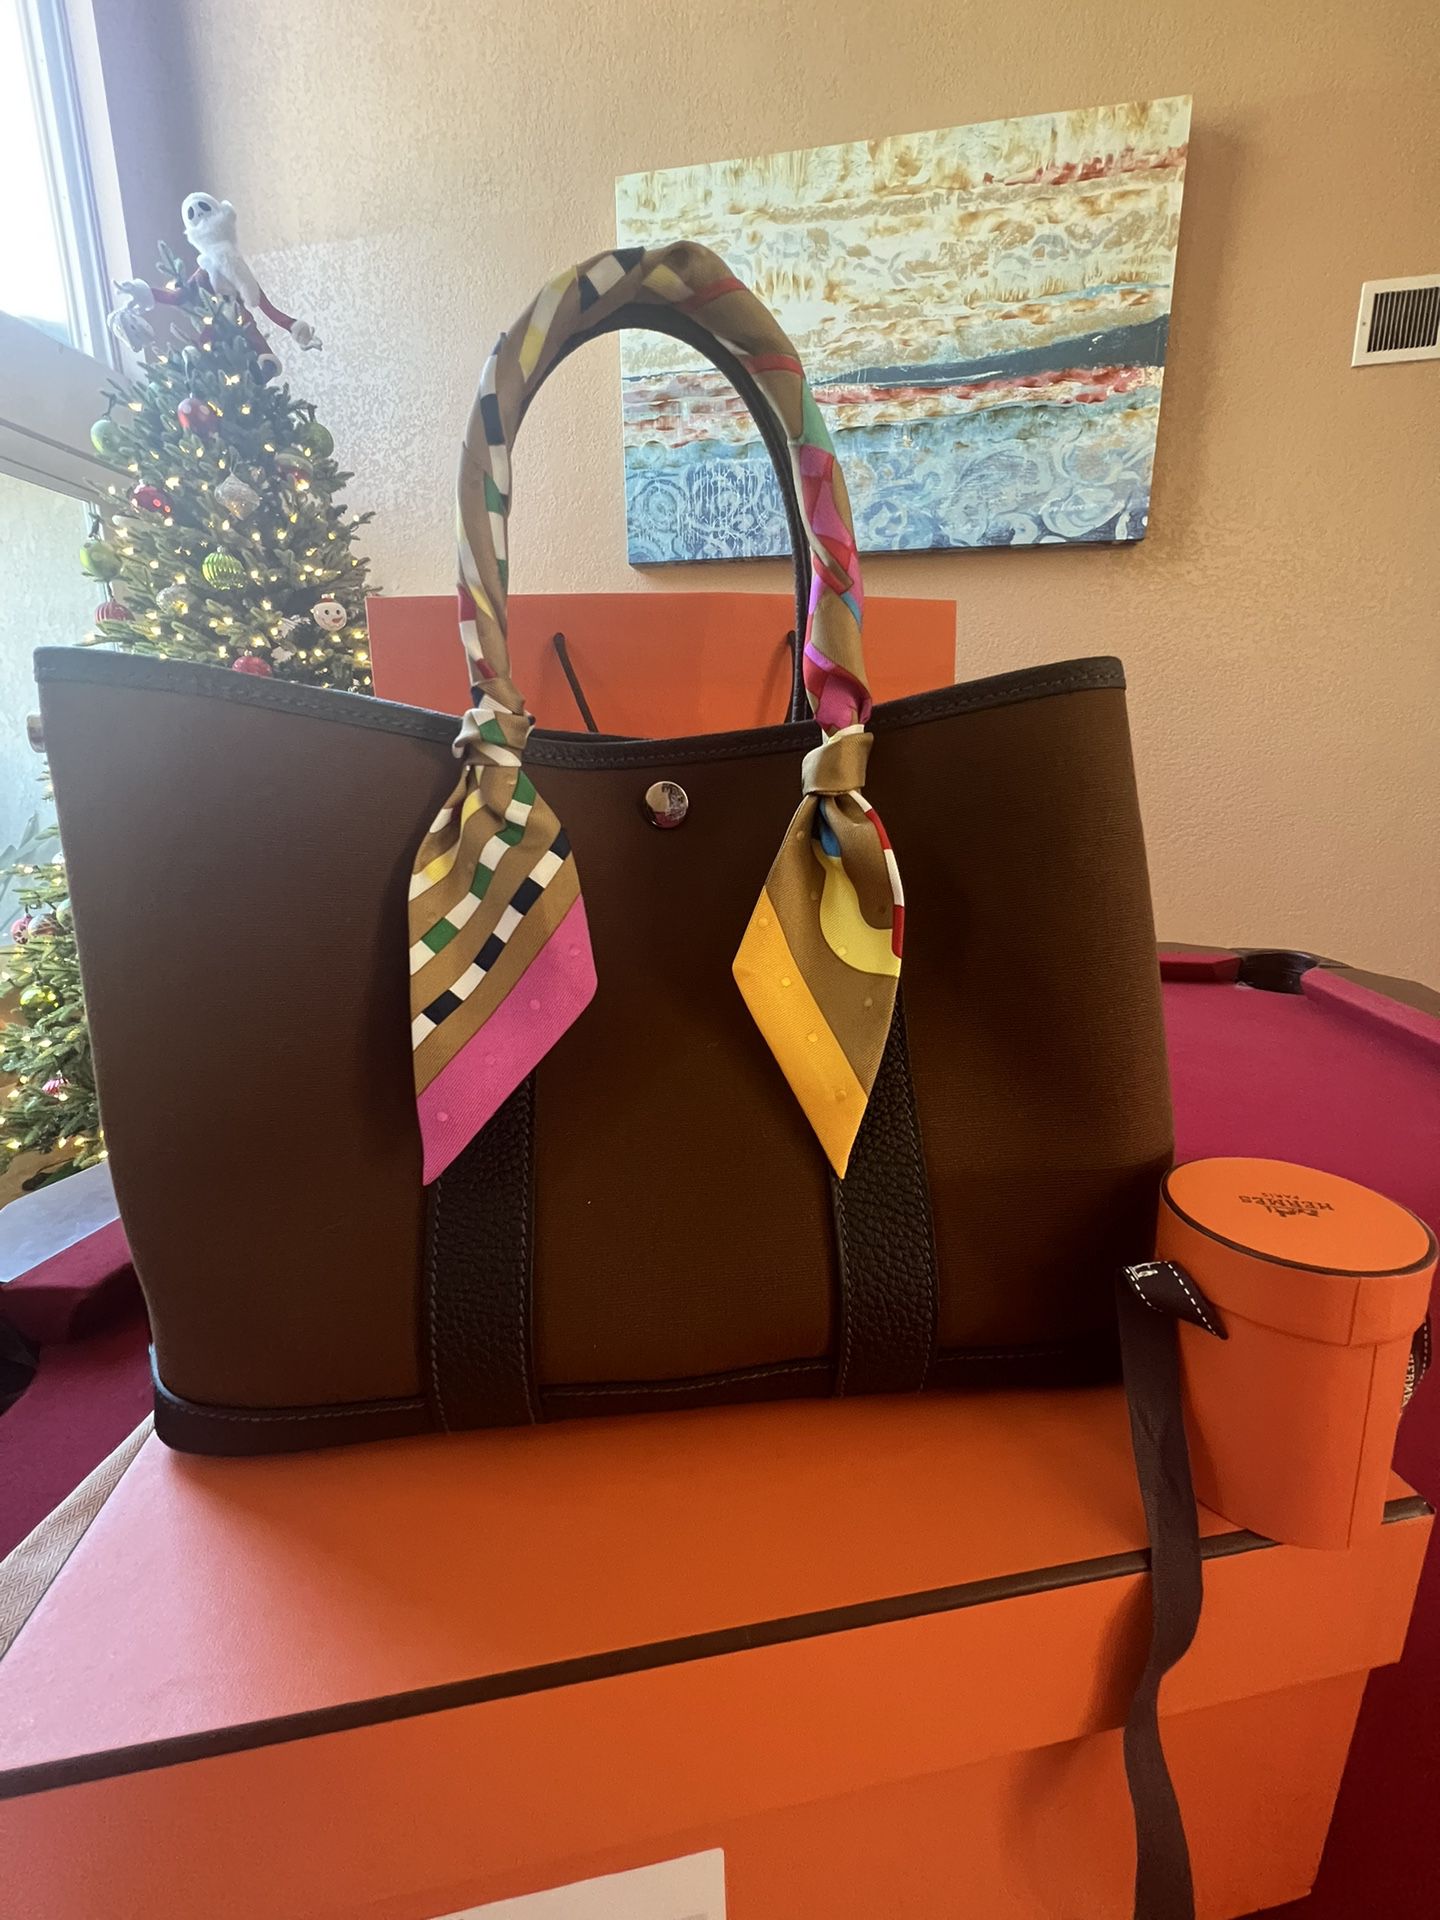 Authentic Brand New Hermes Garden Party 30